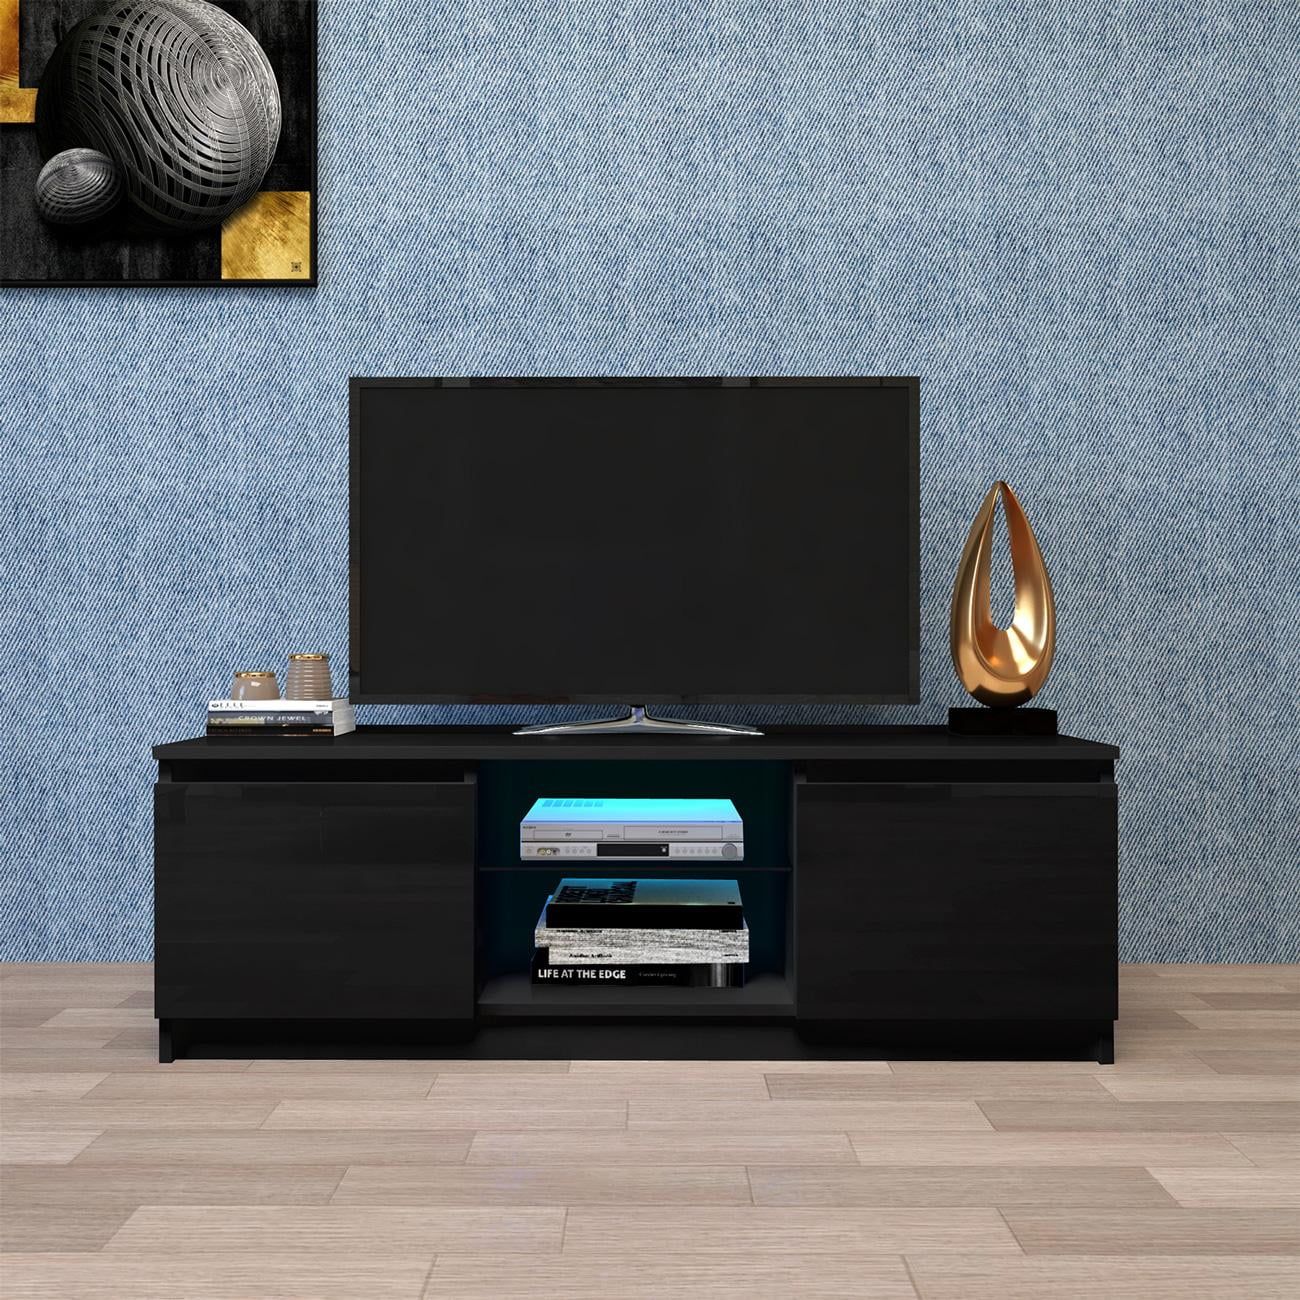 Tv Stand With Storage Drawers Shelves Led Rgb Lights, For Flat Tv 40 55 In Tv Stands With Lights (Gallery 13 of 20)